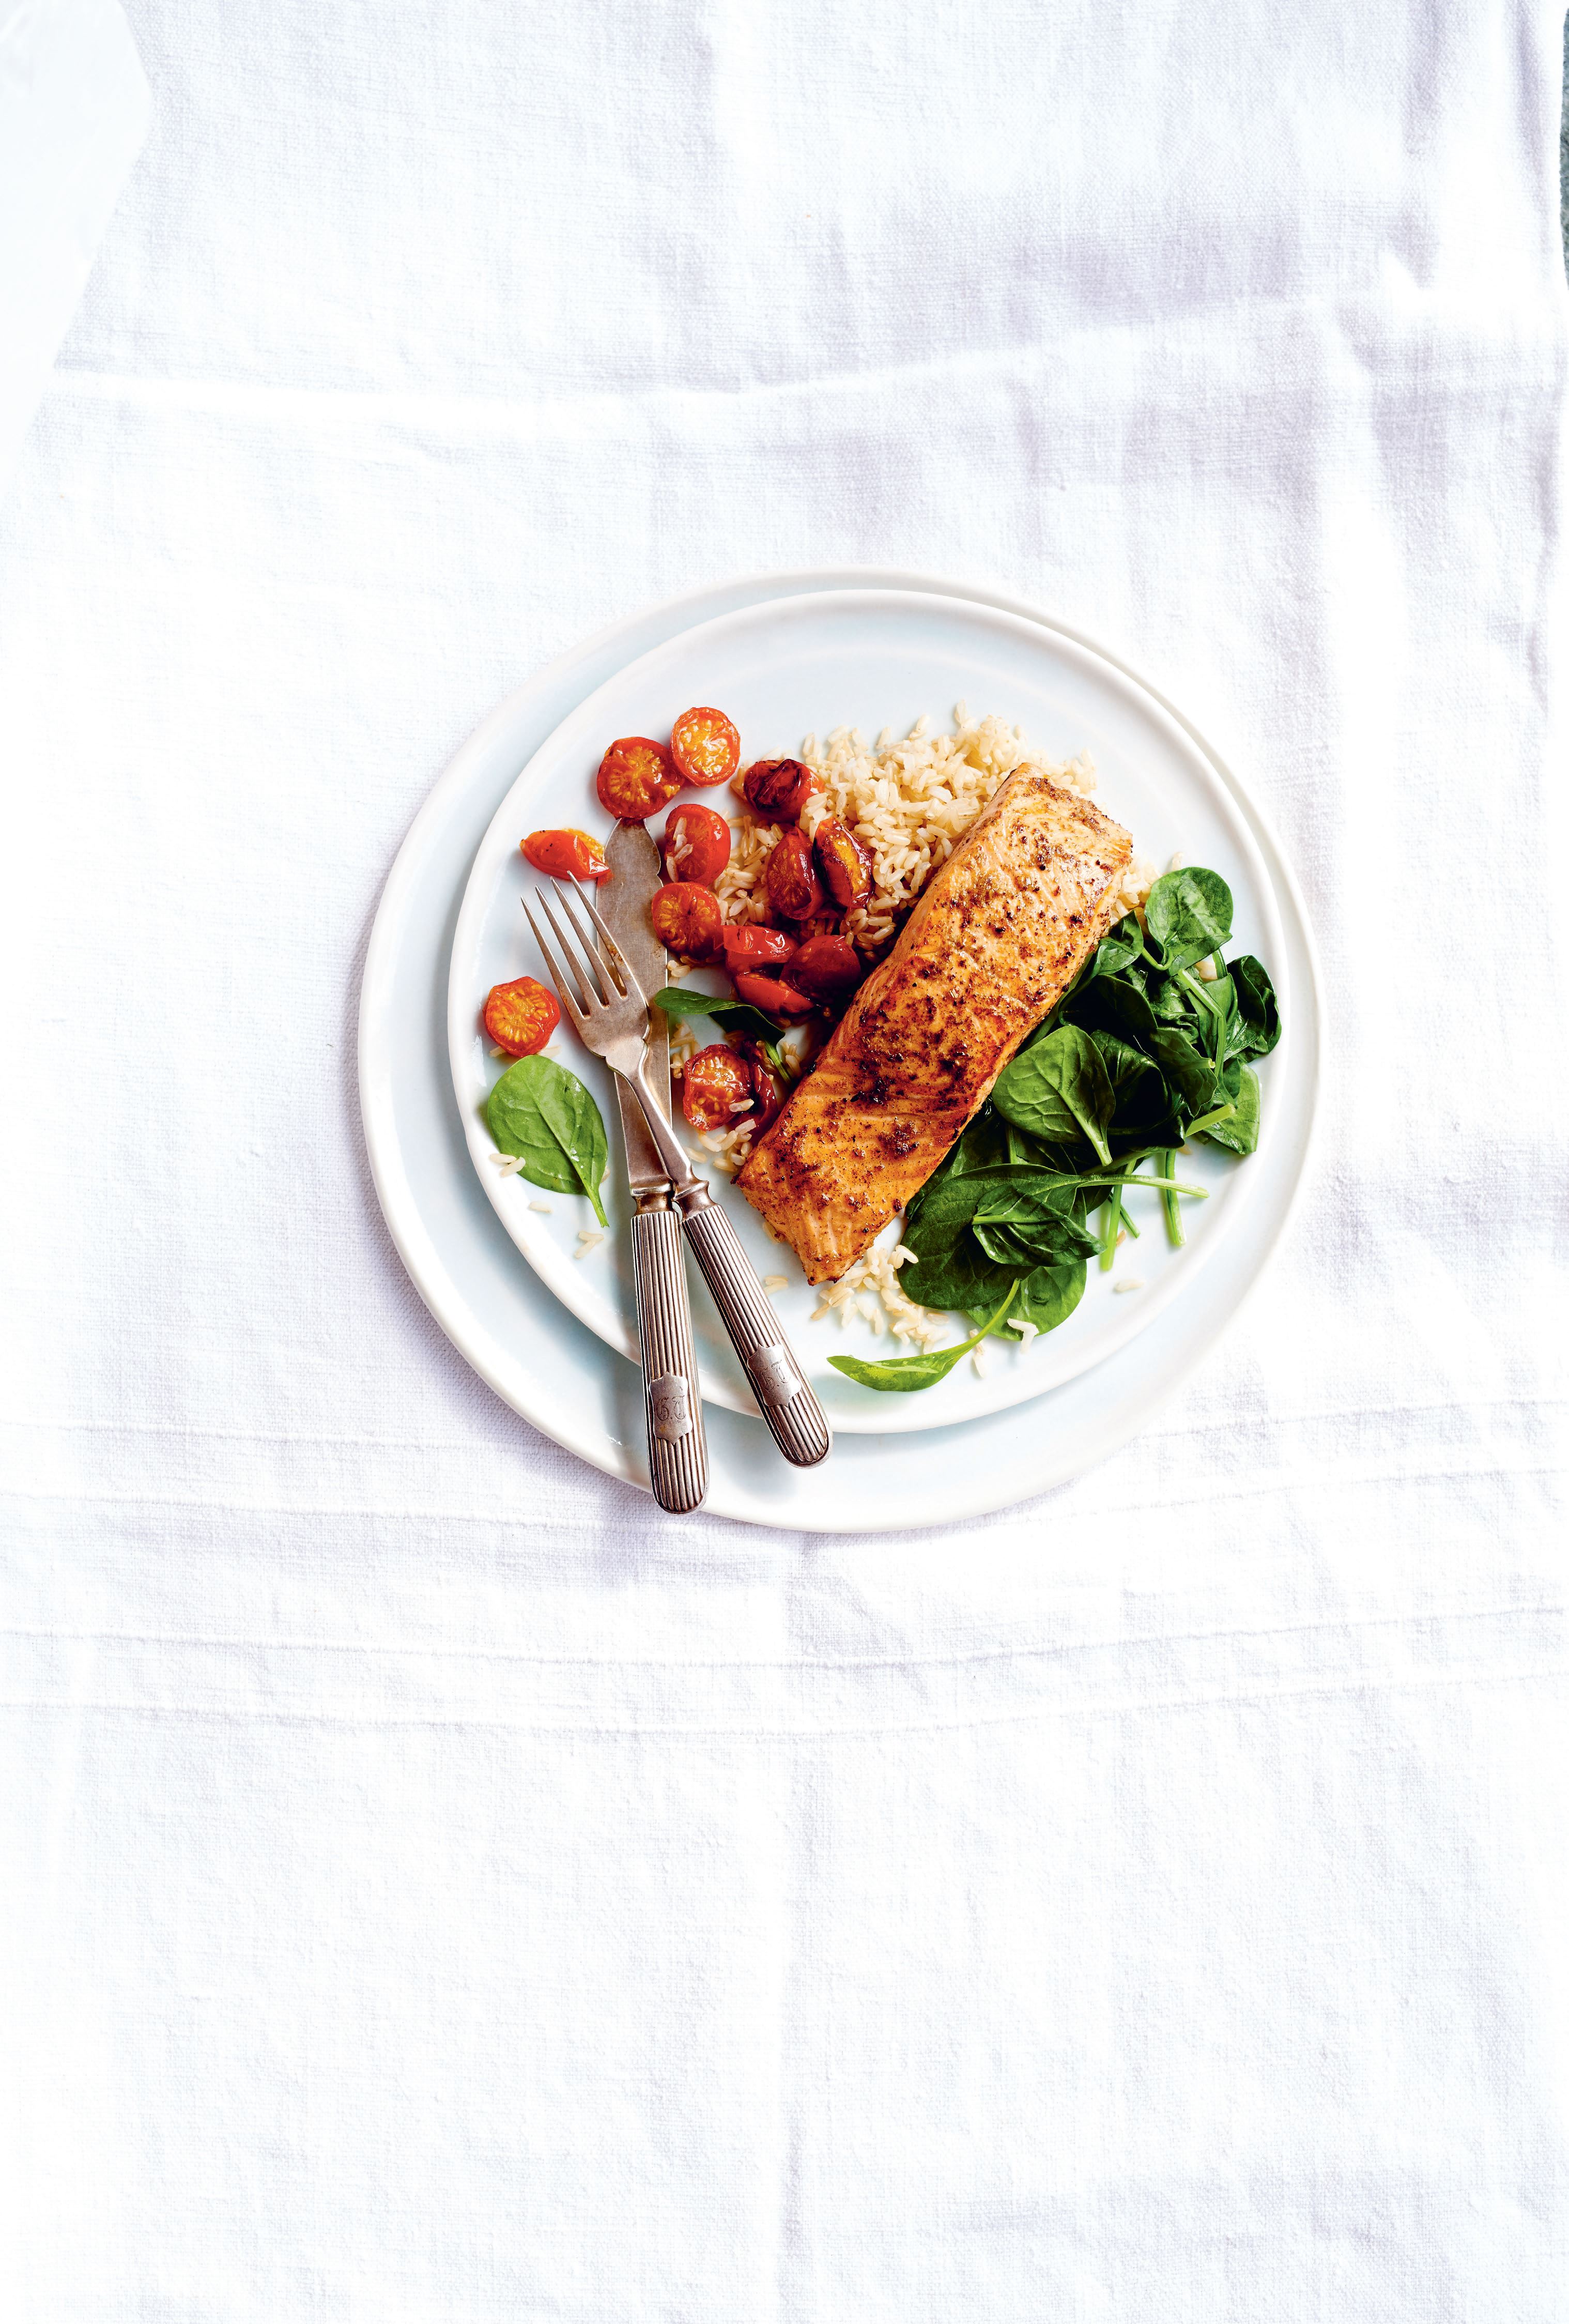 Pan-fried marinated salmon with wilted baby spinach